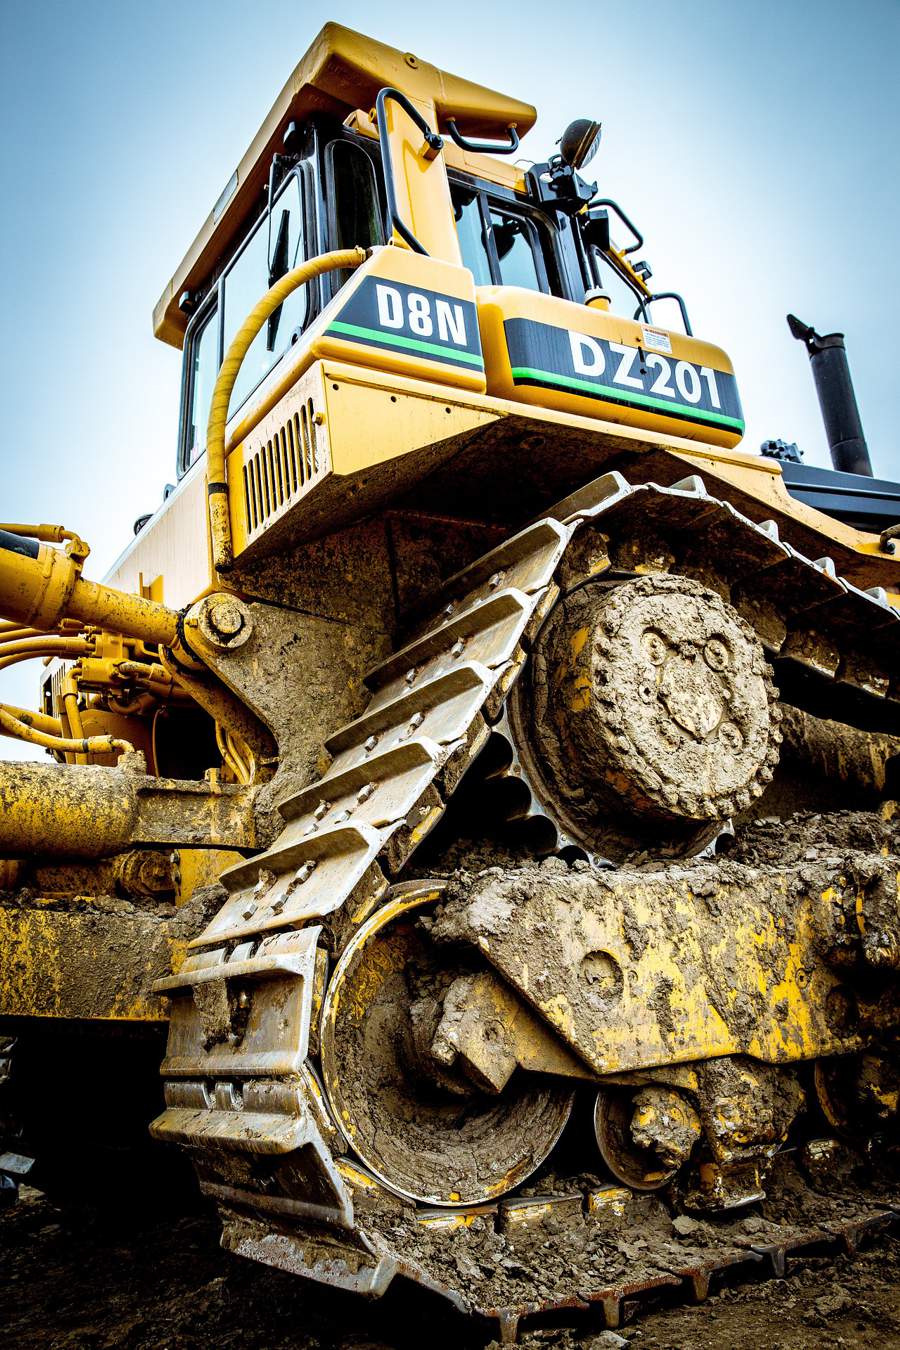 Construction Equipment brands struggle to be the best